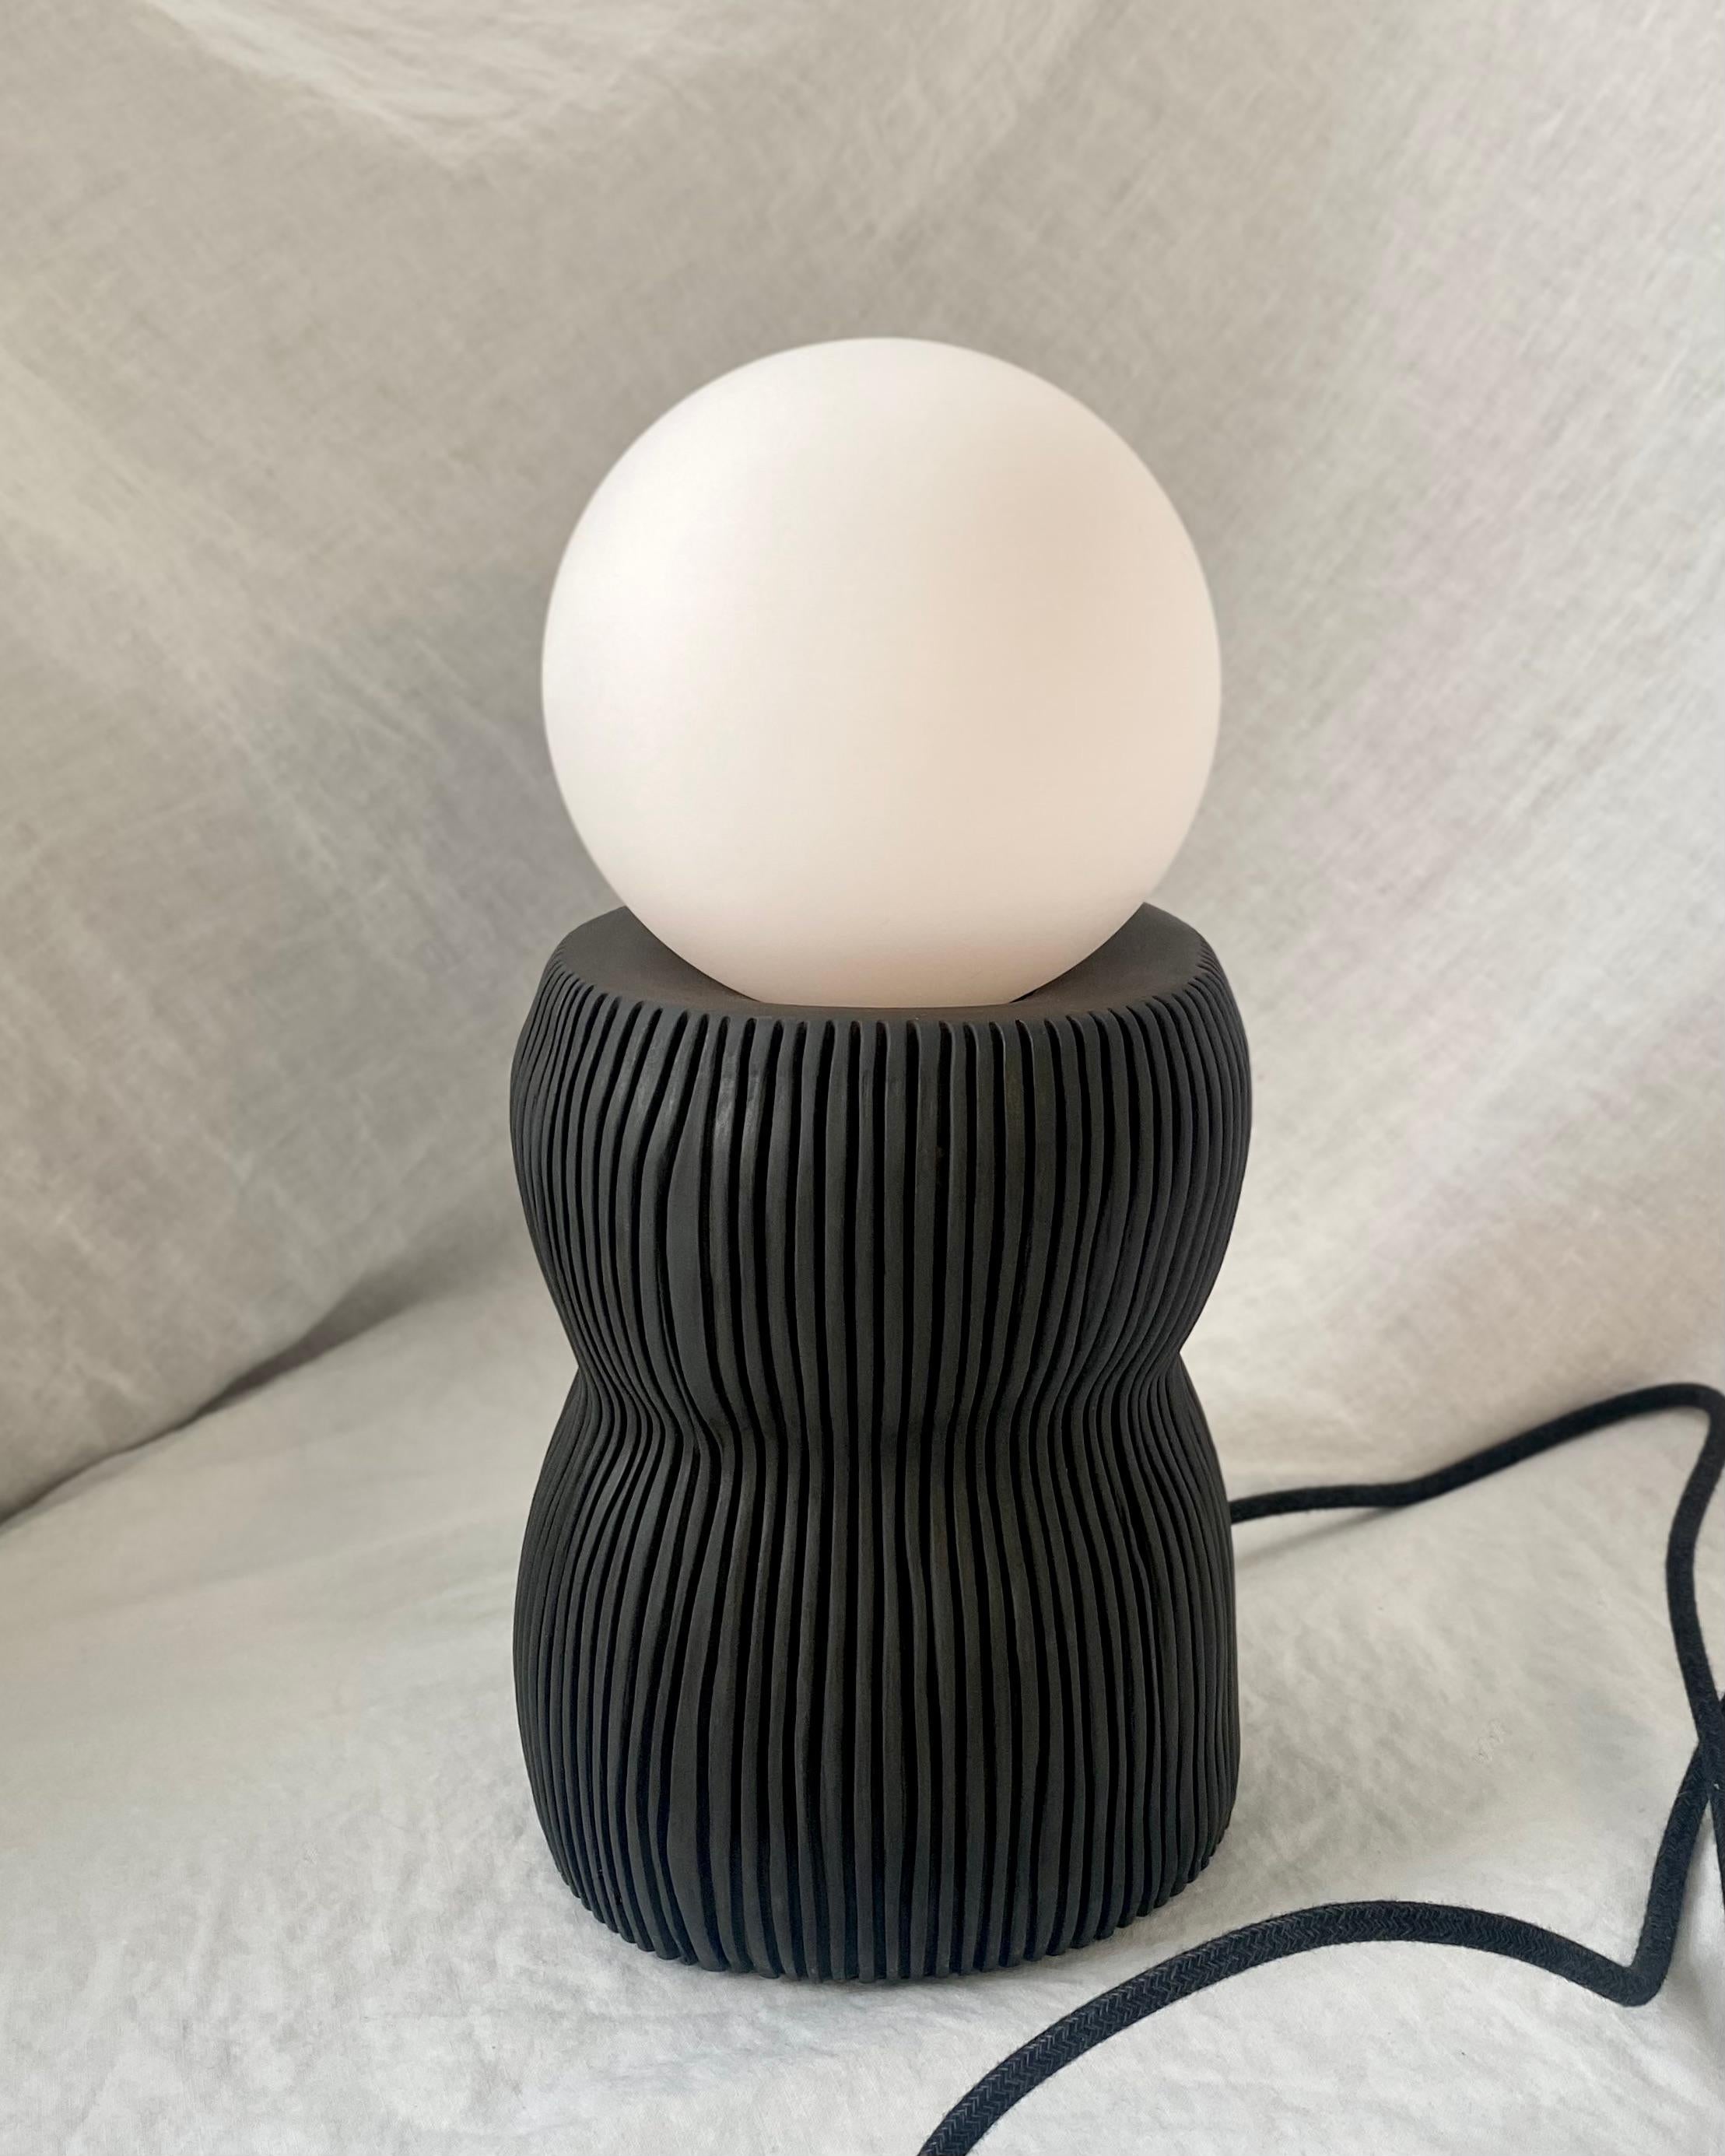 Other Curvy Mood Light For Sale